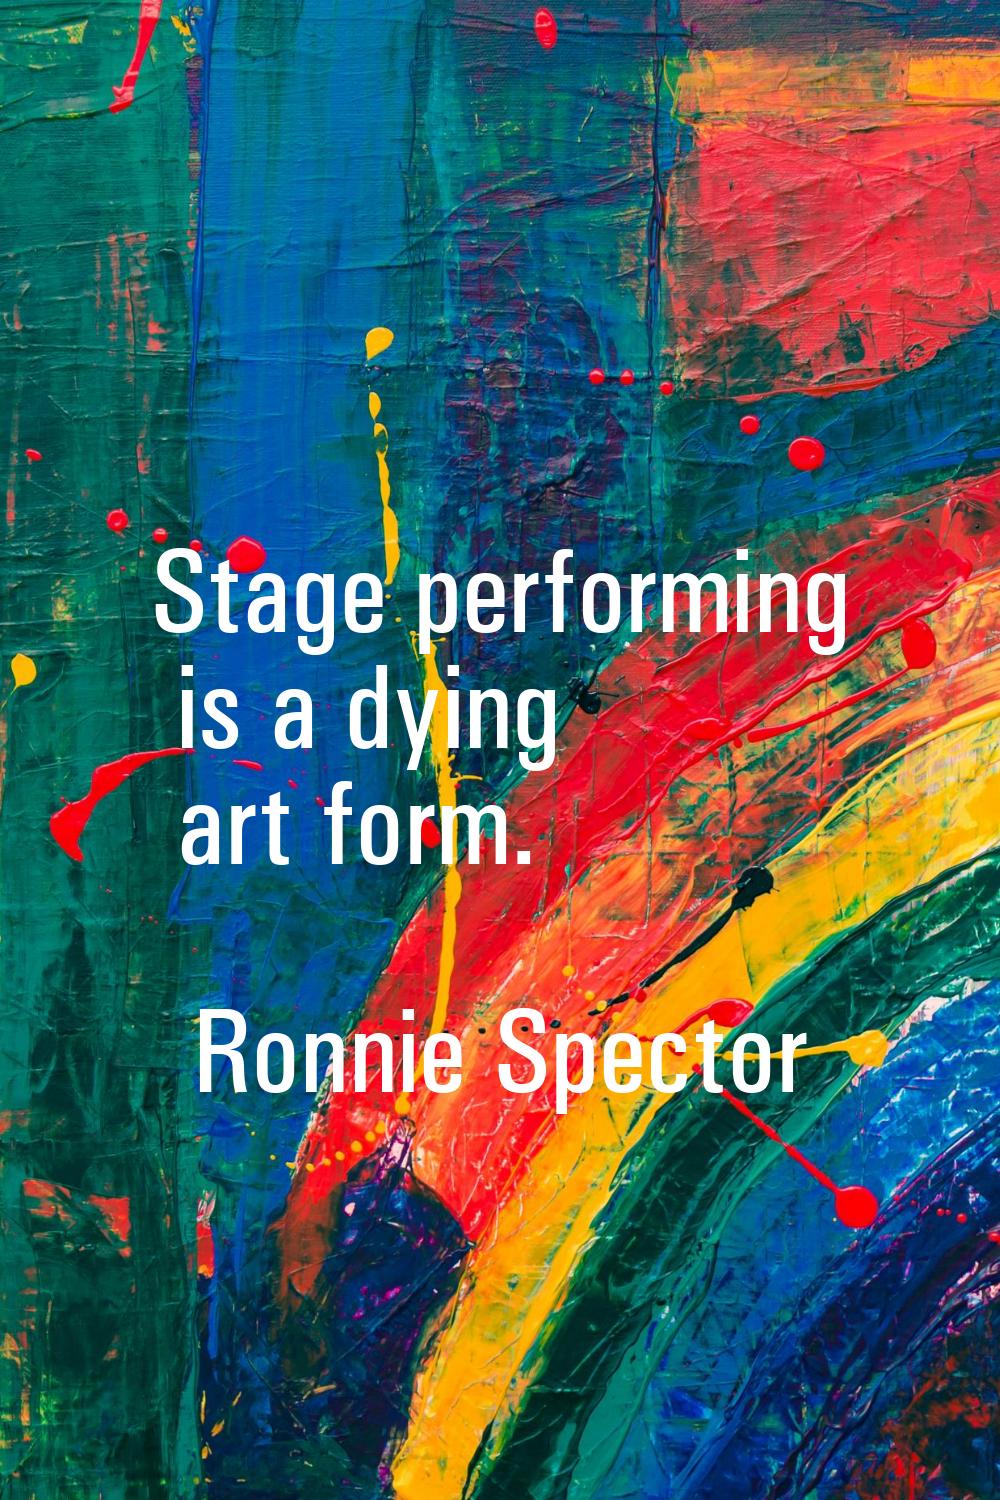 Stage performing is a dying art form.